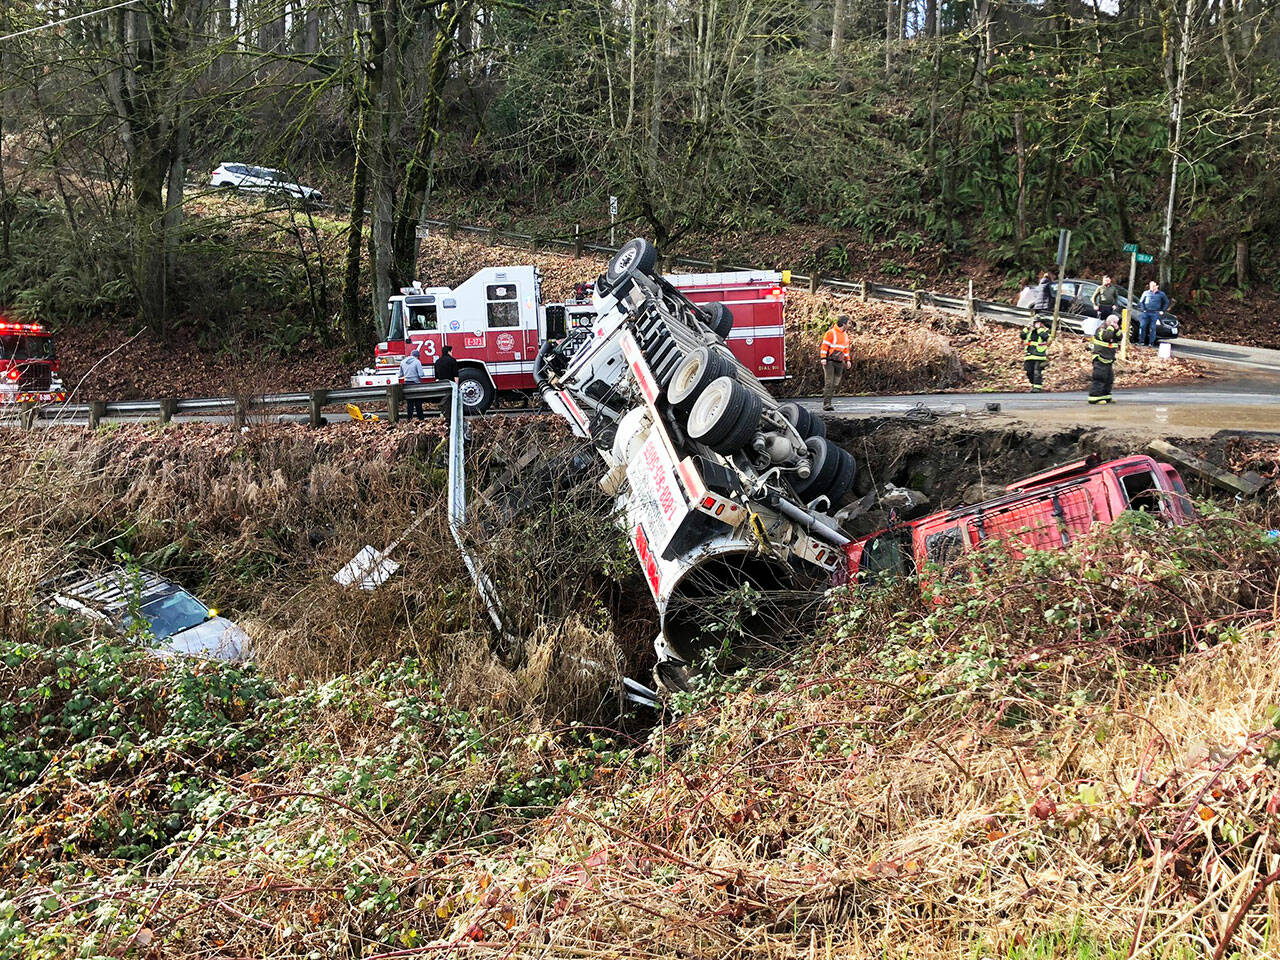 Three vehicles went over an embankment Wednesday morning, Feb. 8 near 55th Avenue South and South 272nd Street in unincorporated King County. One person suffered a minor injury. Four people escaped injury. COURTESY PHOTO, Puget Sound Fire